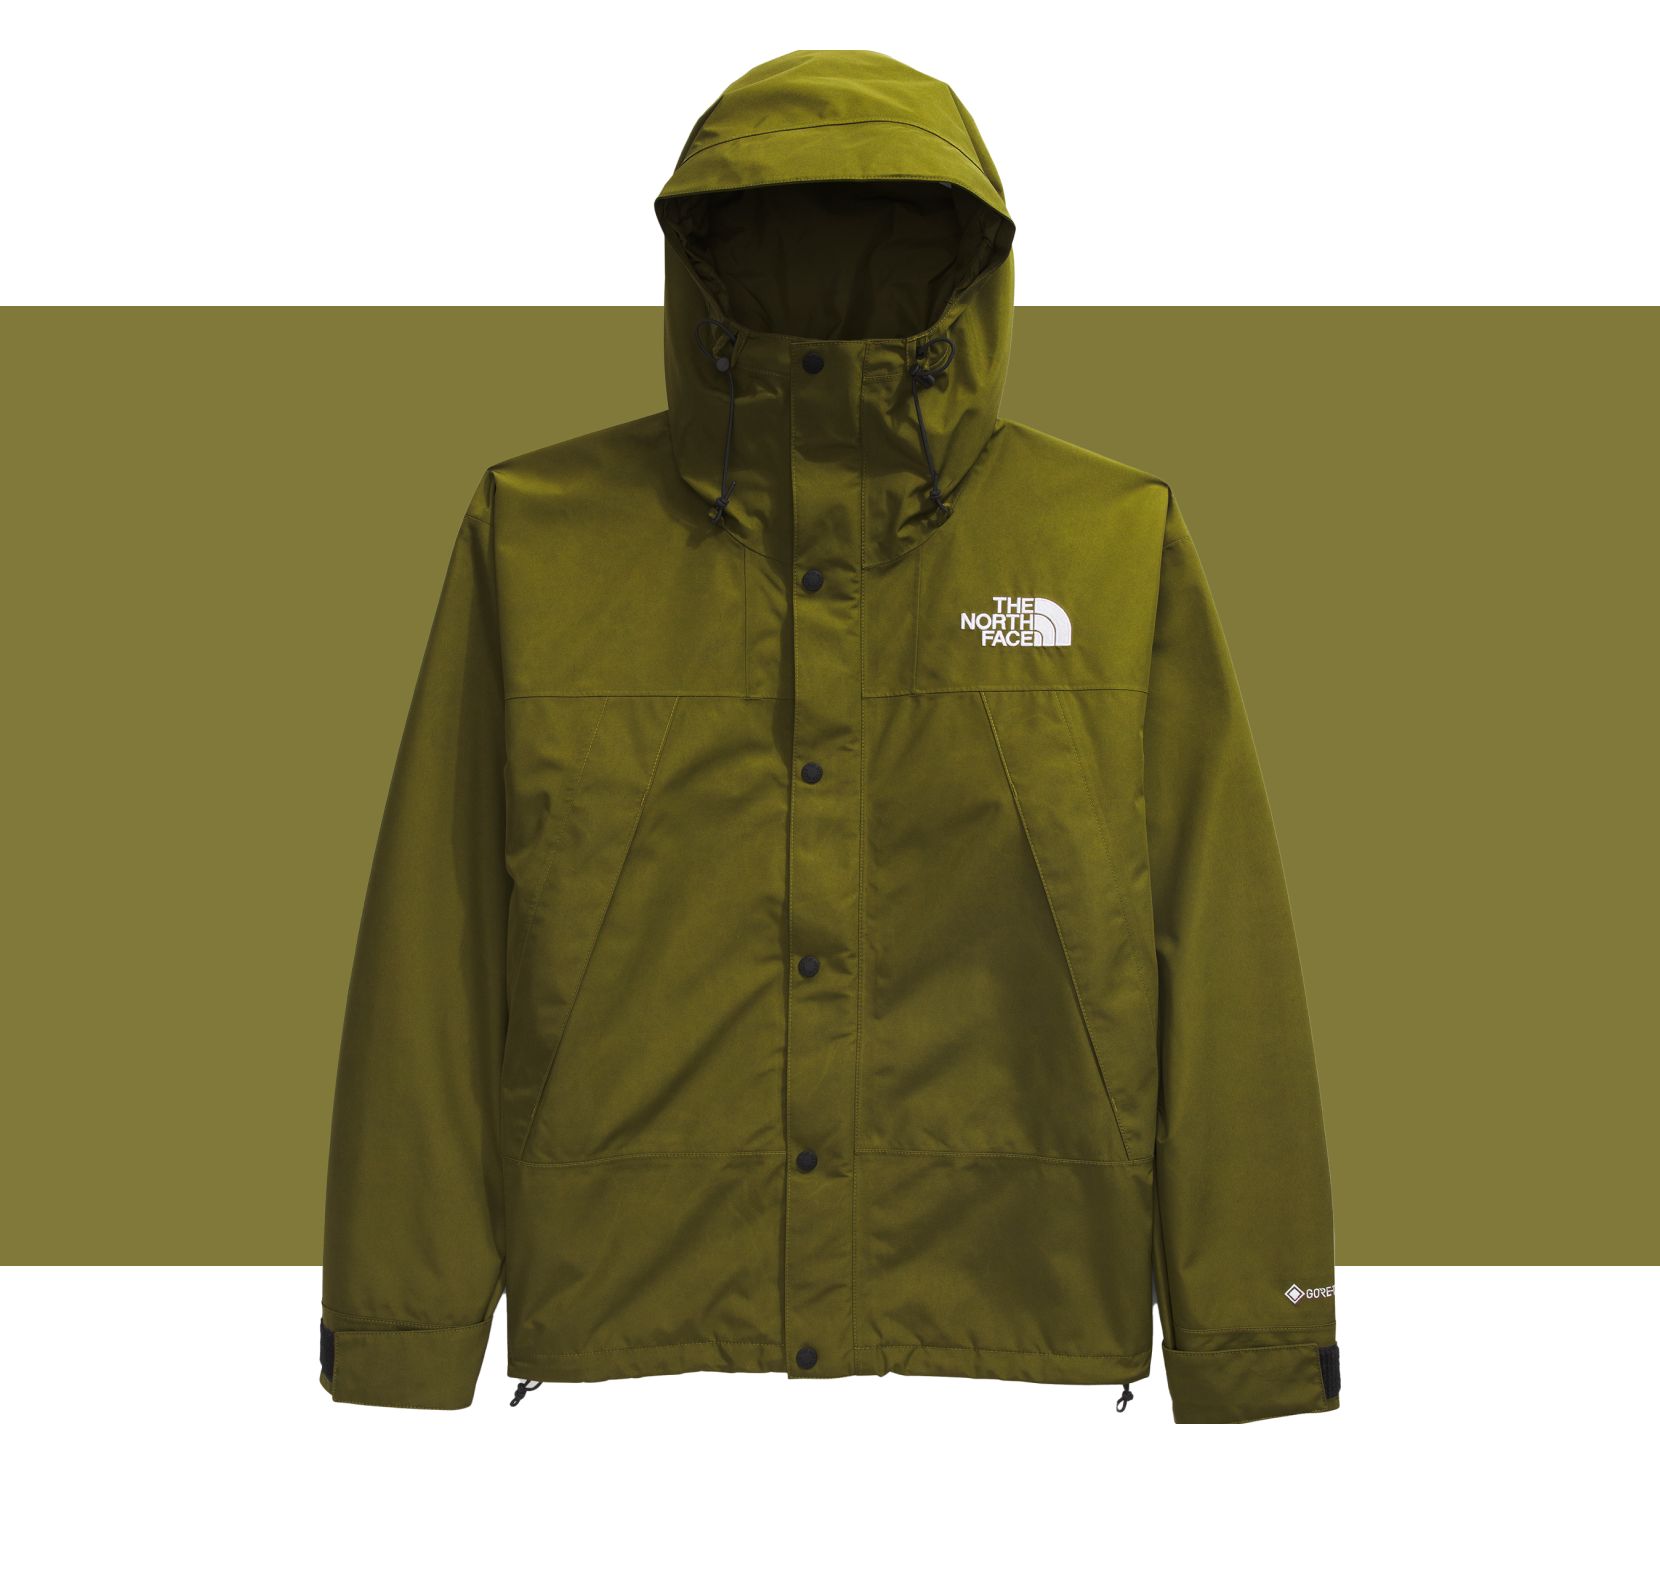 The North Face GORE-TEX® Mountain Jacket